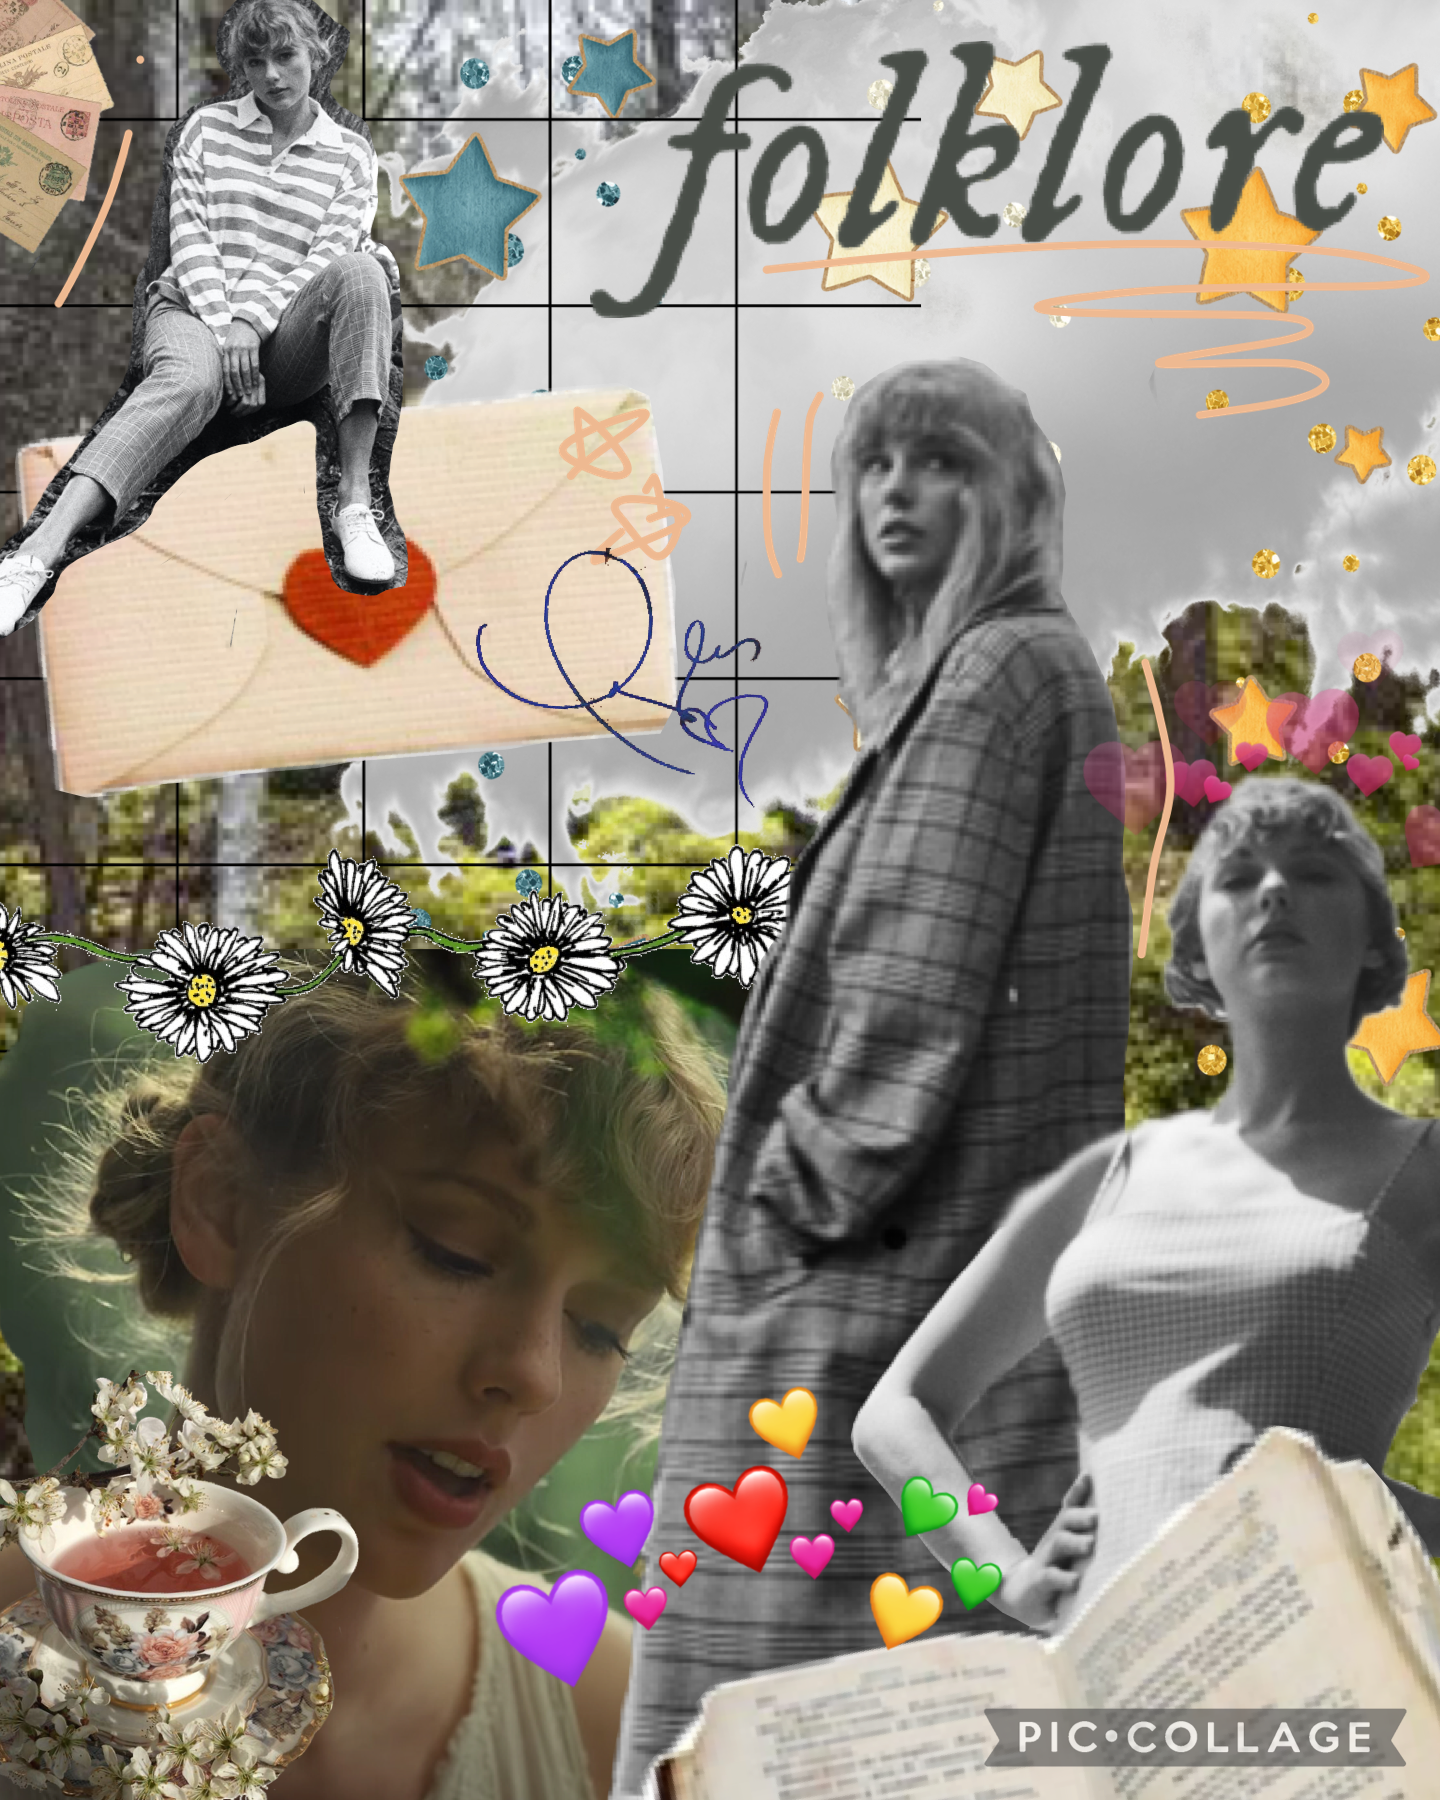 my collages have improved since ive been away #folklore #taylorswift #collage #fyp #new #taylor #album #cottagecore #woods #stars #songlyrics #hearts 